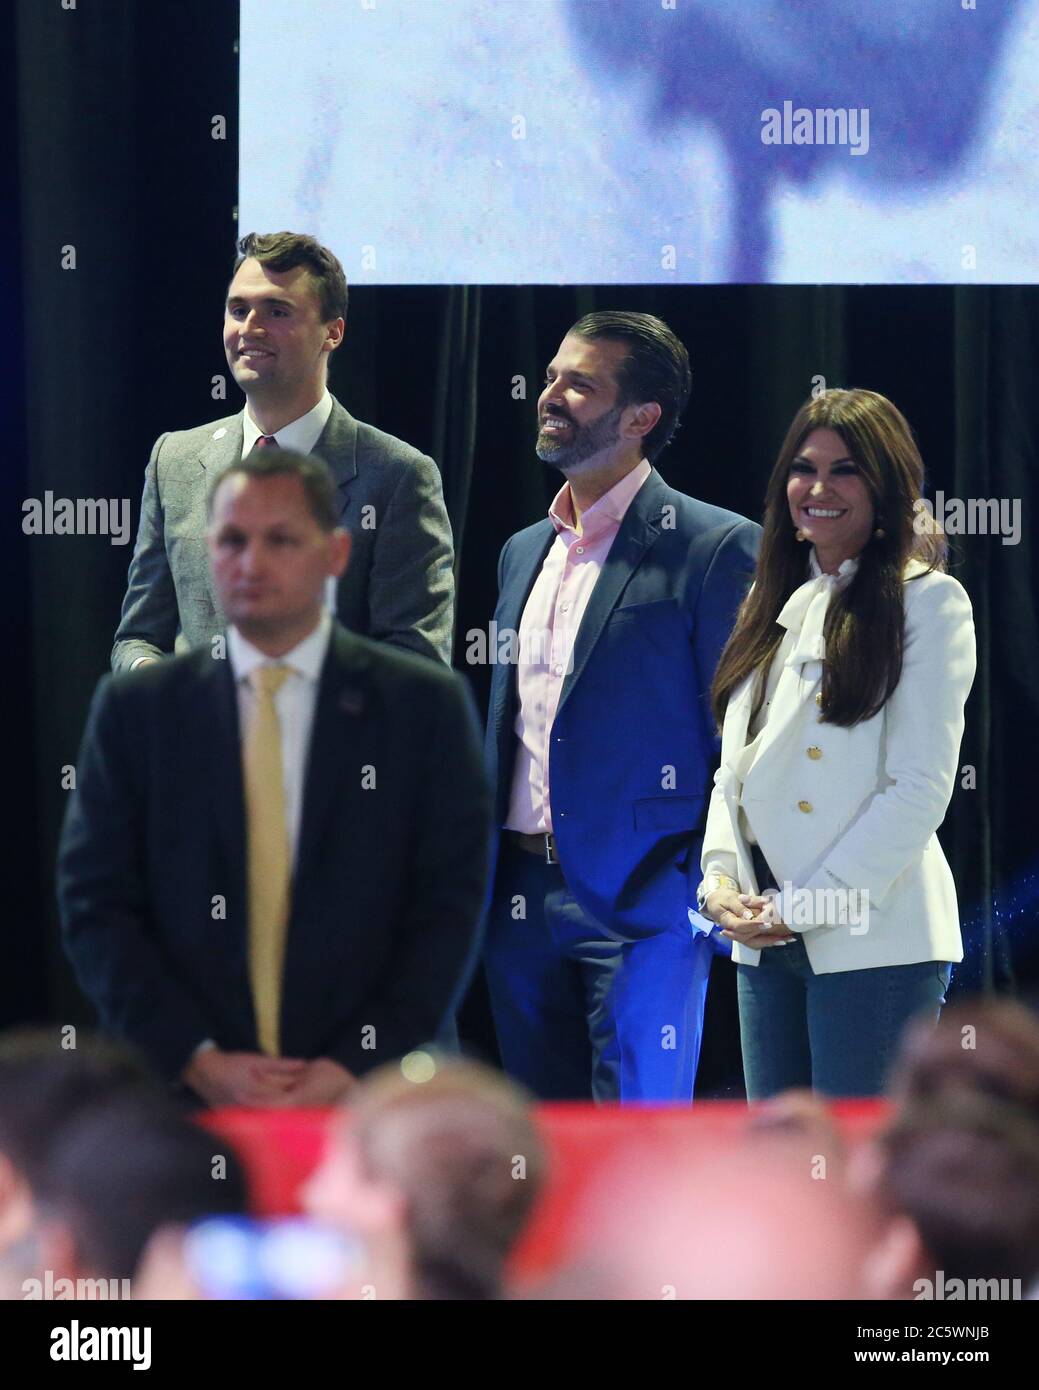 West PALM BEACH, Florida - 21 DICEMBRE: Donald Trump Jr, Kimberly Guilfoyle torna al Turning Point USA Student Action Summit del 2019 - giorno 3 al Palm Beach County Convention Center il 21 dicembre 2019 a West Palm Beach, Florida. People: Donald Trump Jr, Kimberly Guilfoyle Credit: Storms Media Group/Alamy Live News Foto Stock